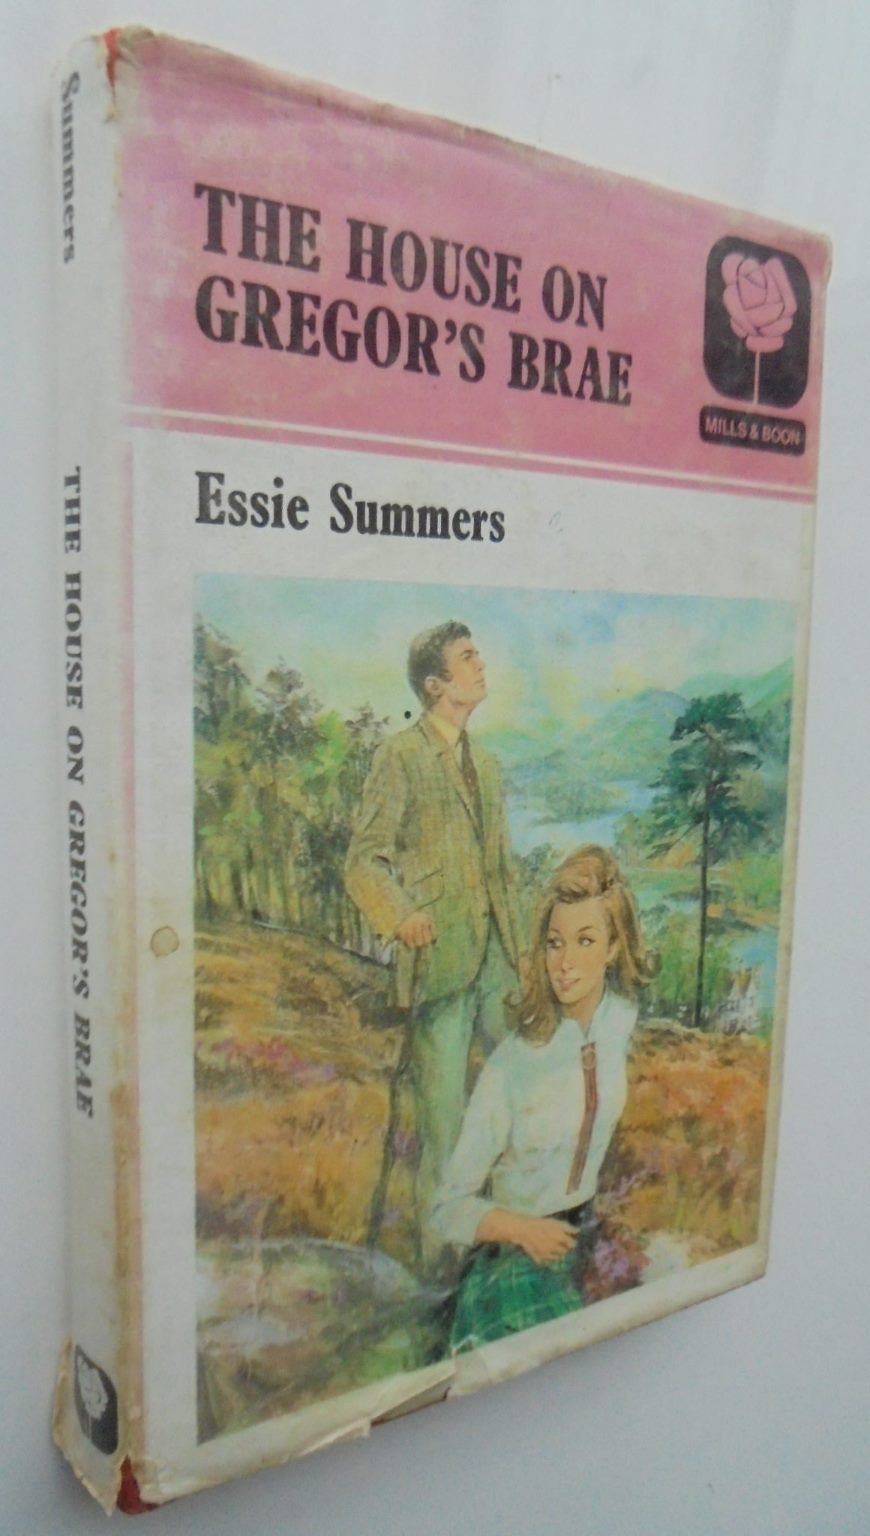 The House on Gregor's Brae. by Essie Summers. Mills & Boon (1971) 1st edition